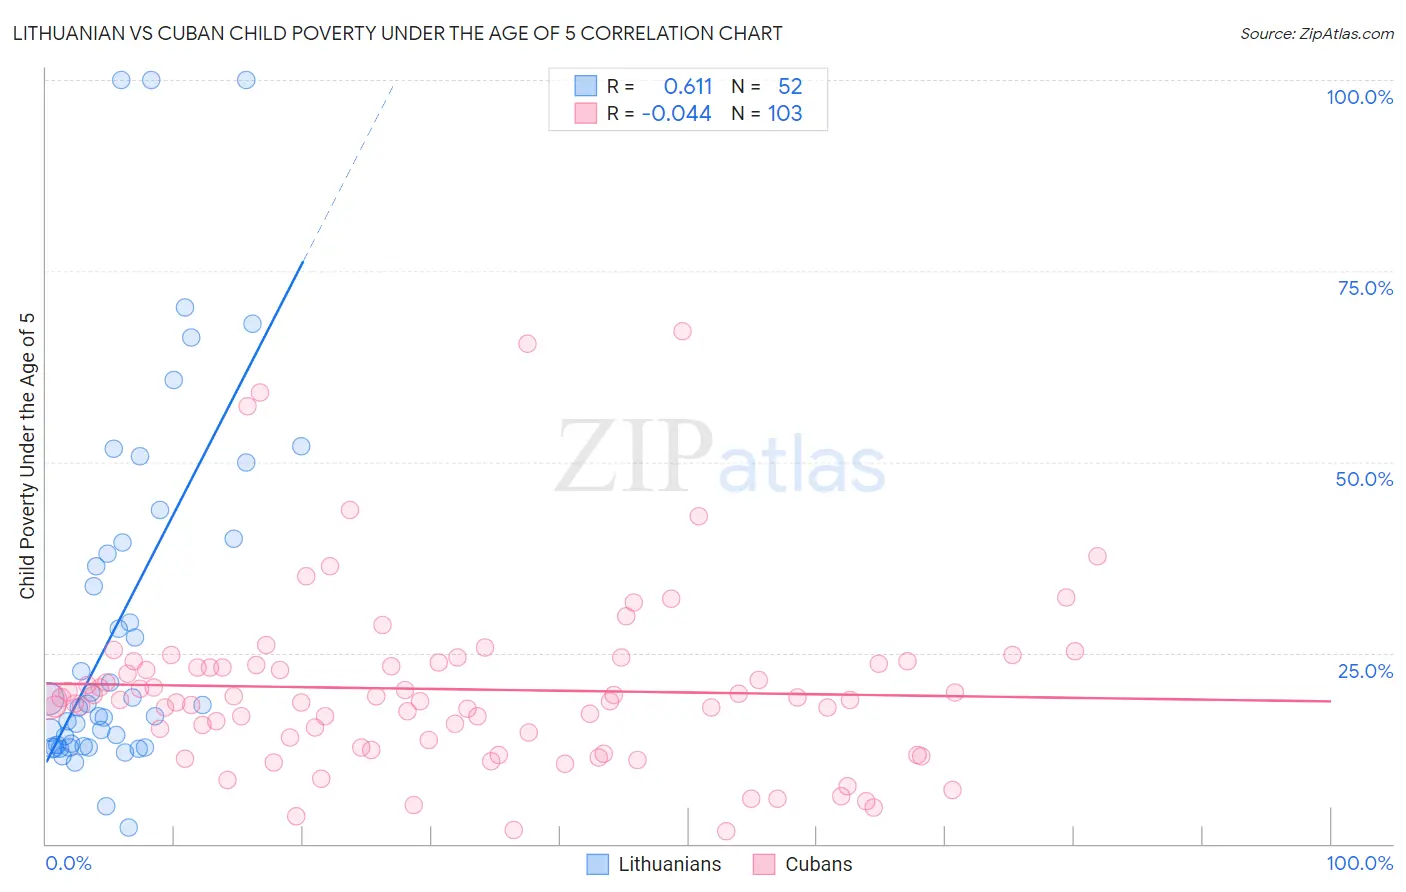 Lithuanian vs Cuban Child Poverty Under the Age of 5